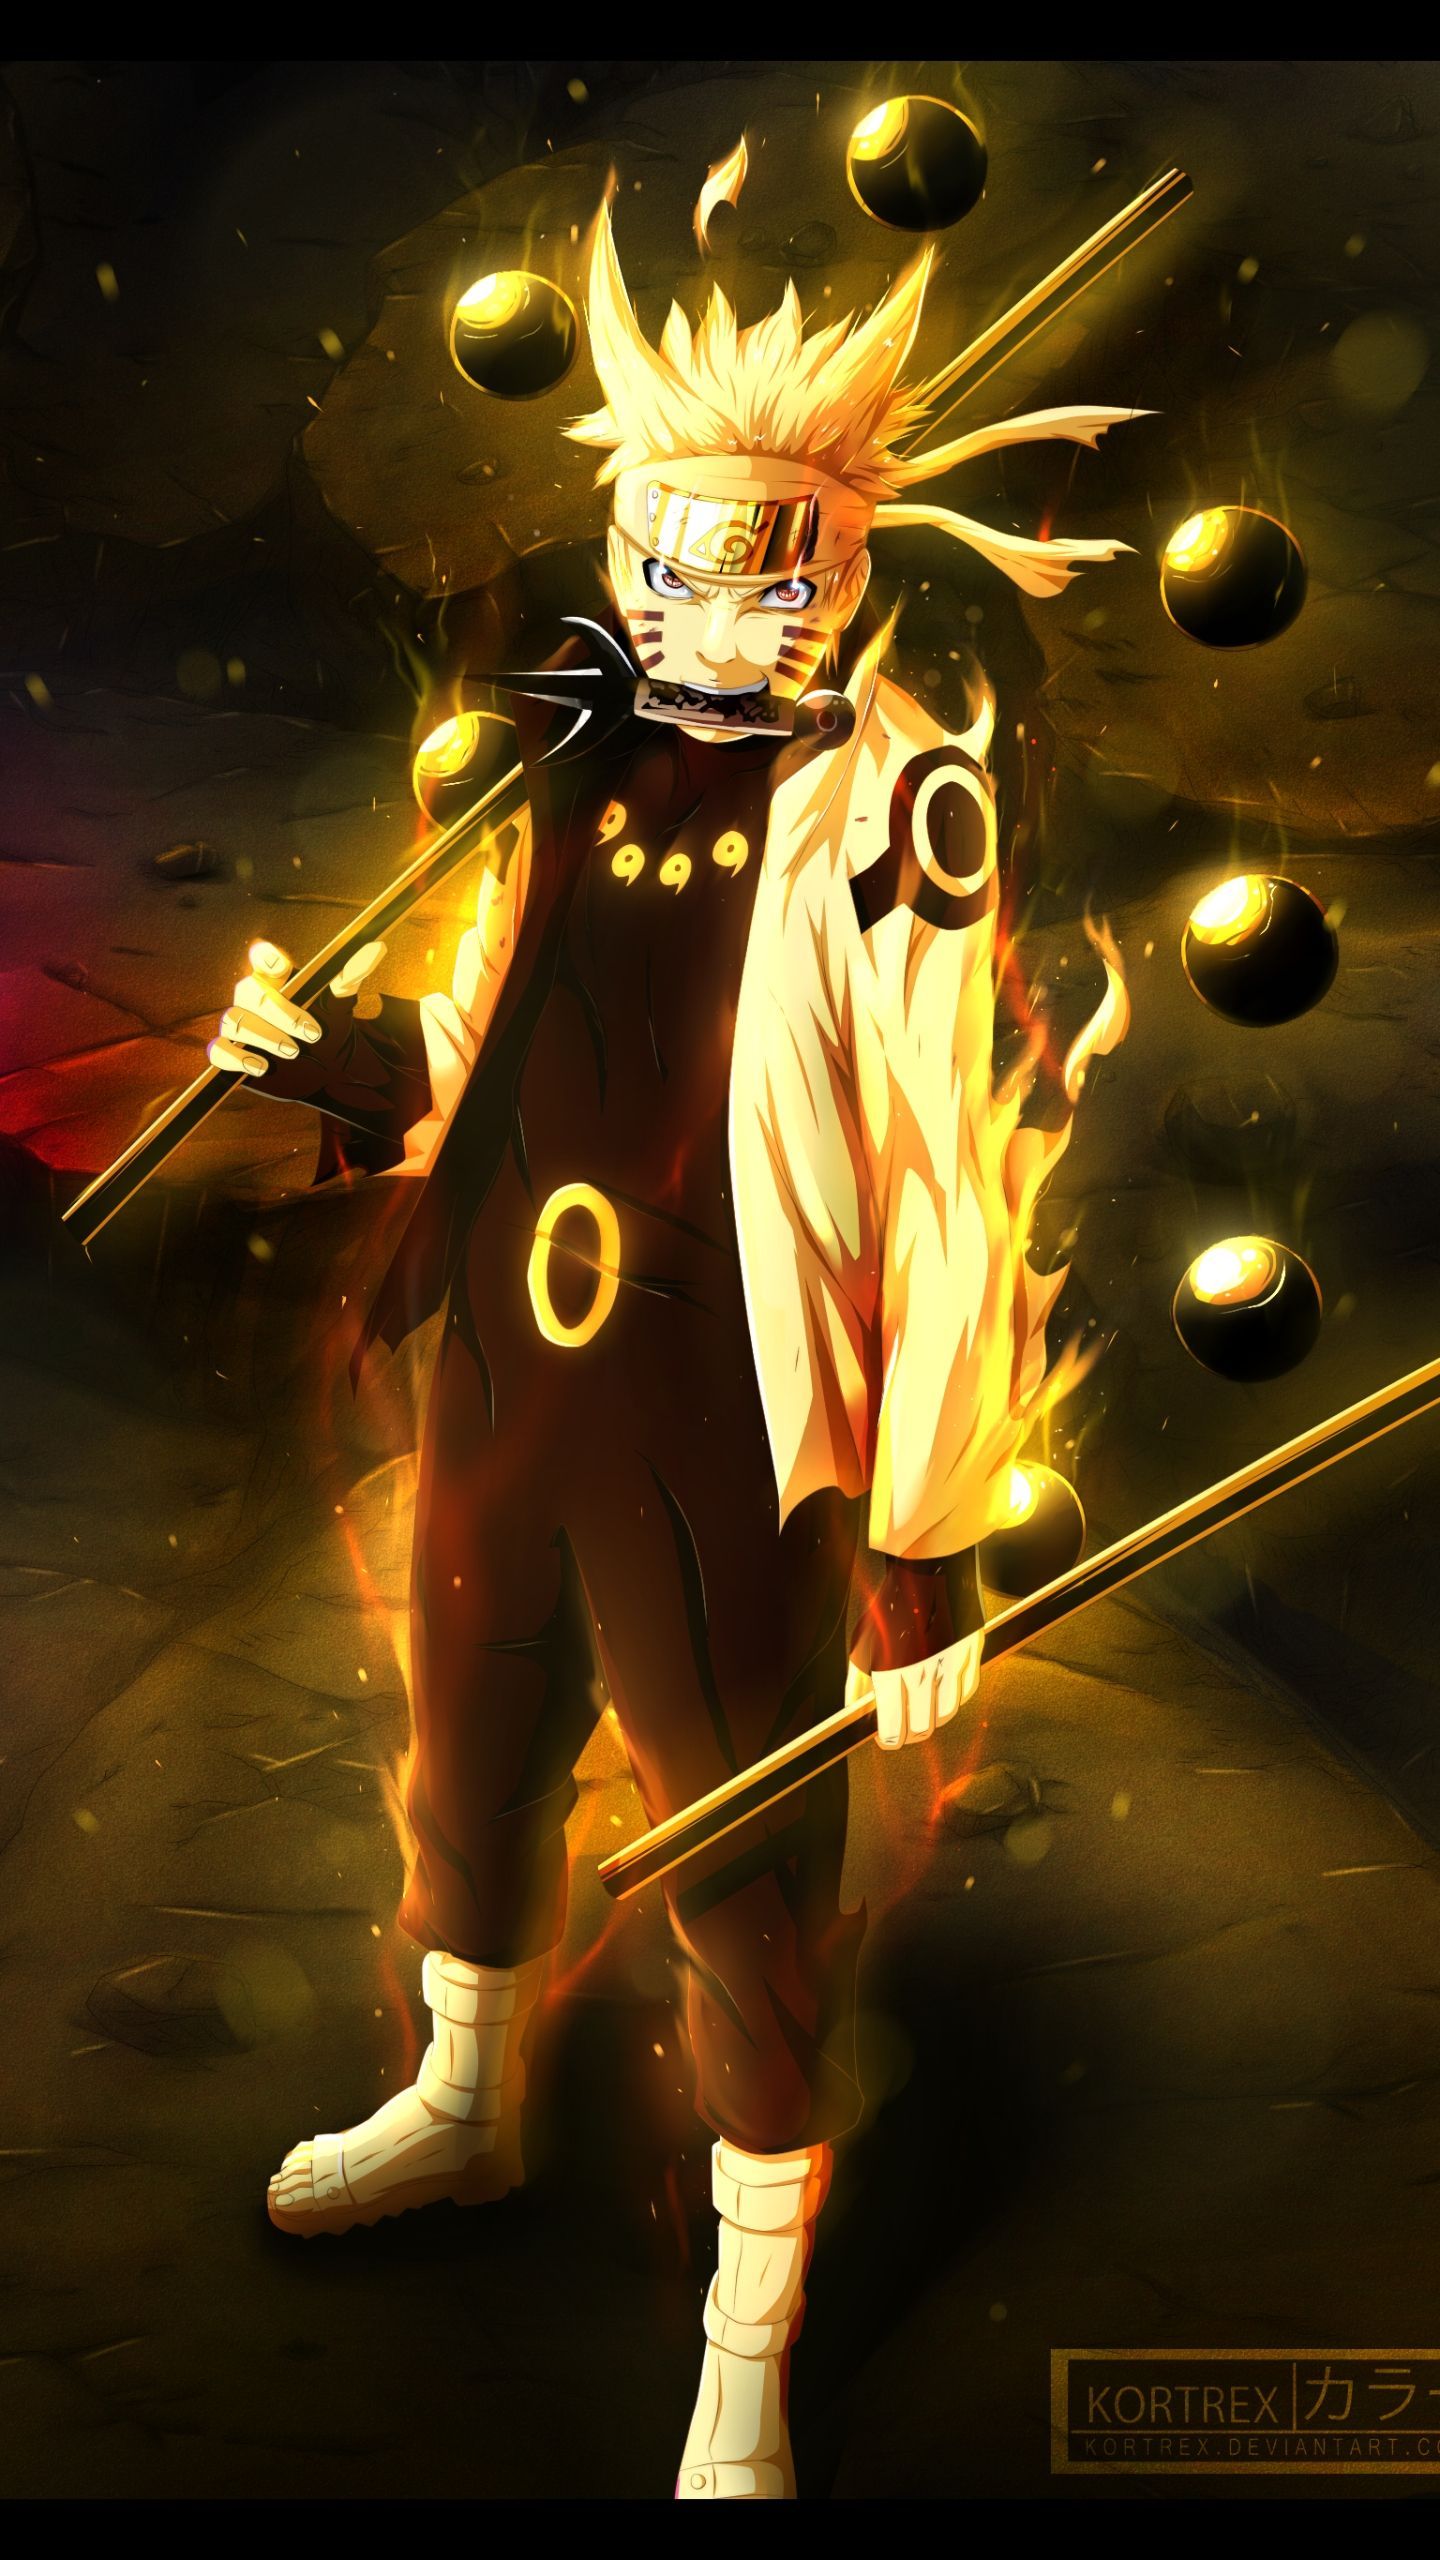 Free Download Naruto Shippuden Awesome Phone Wallpapers, PixelsTalk.Net